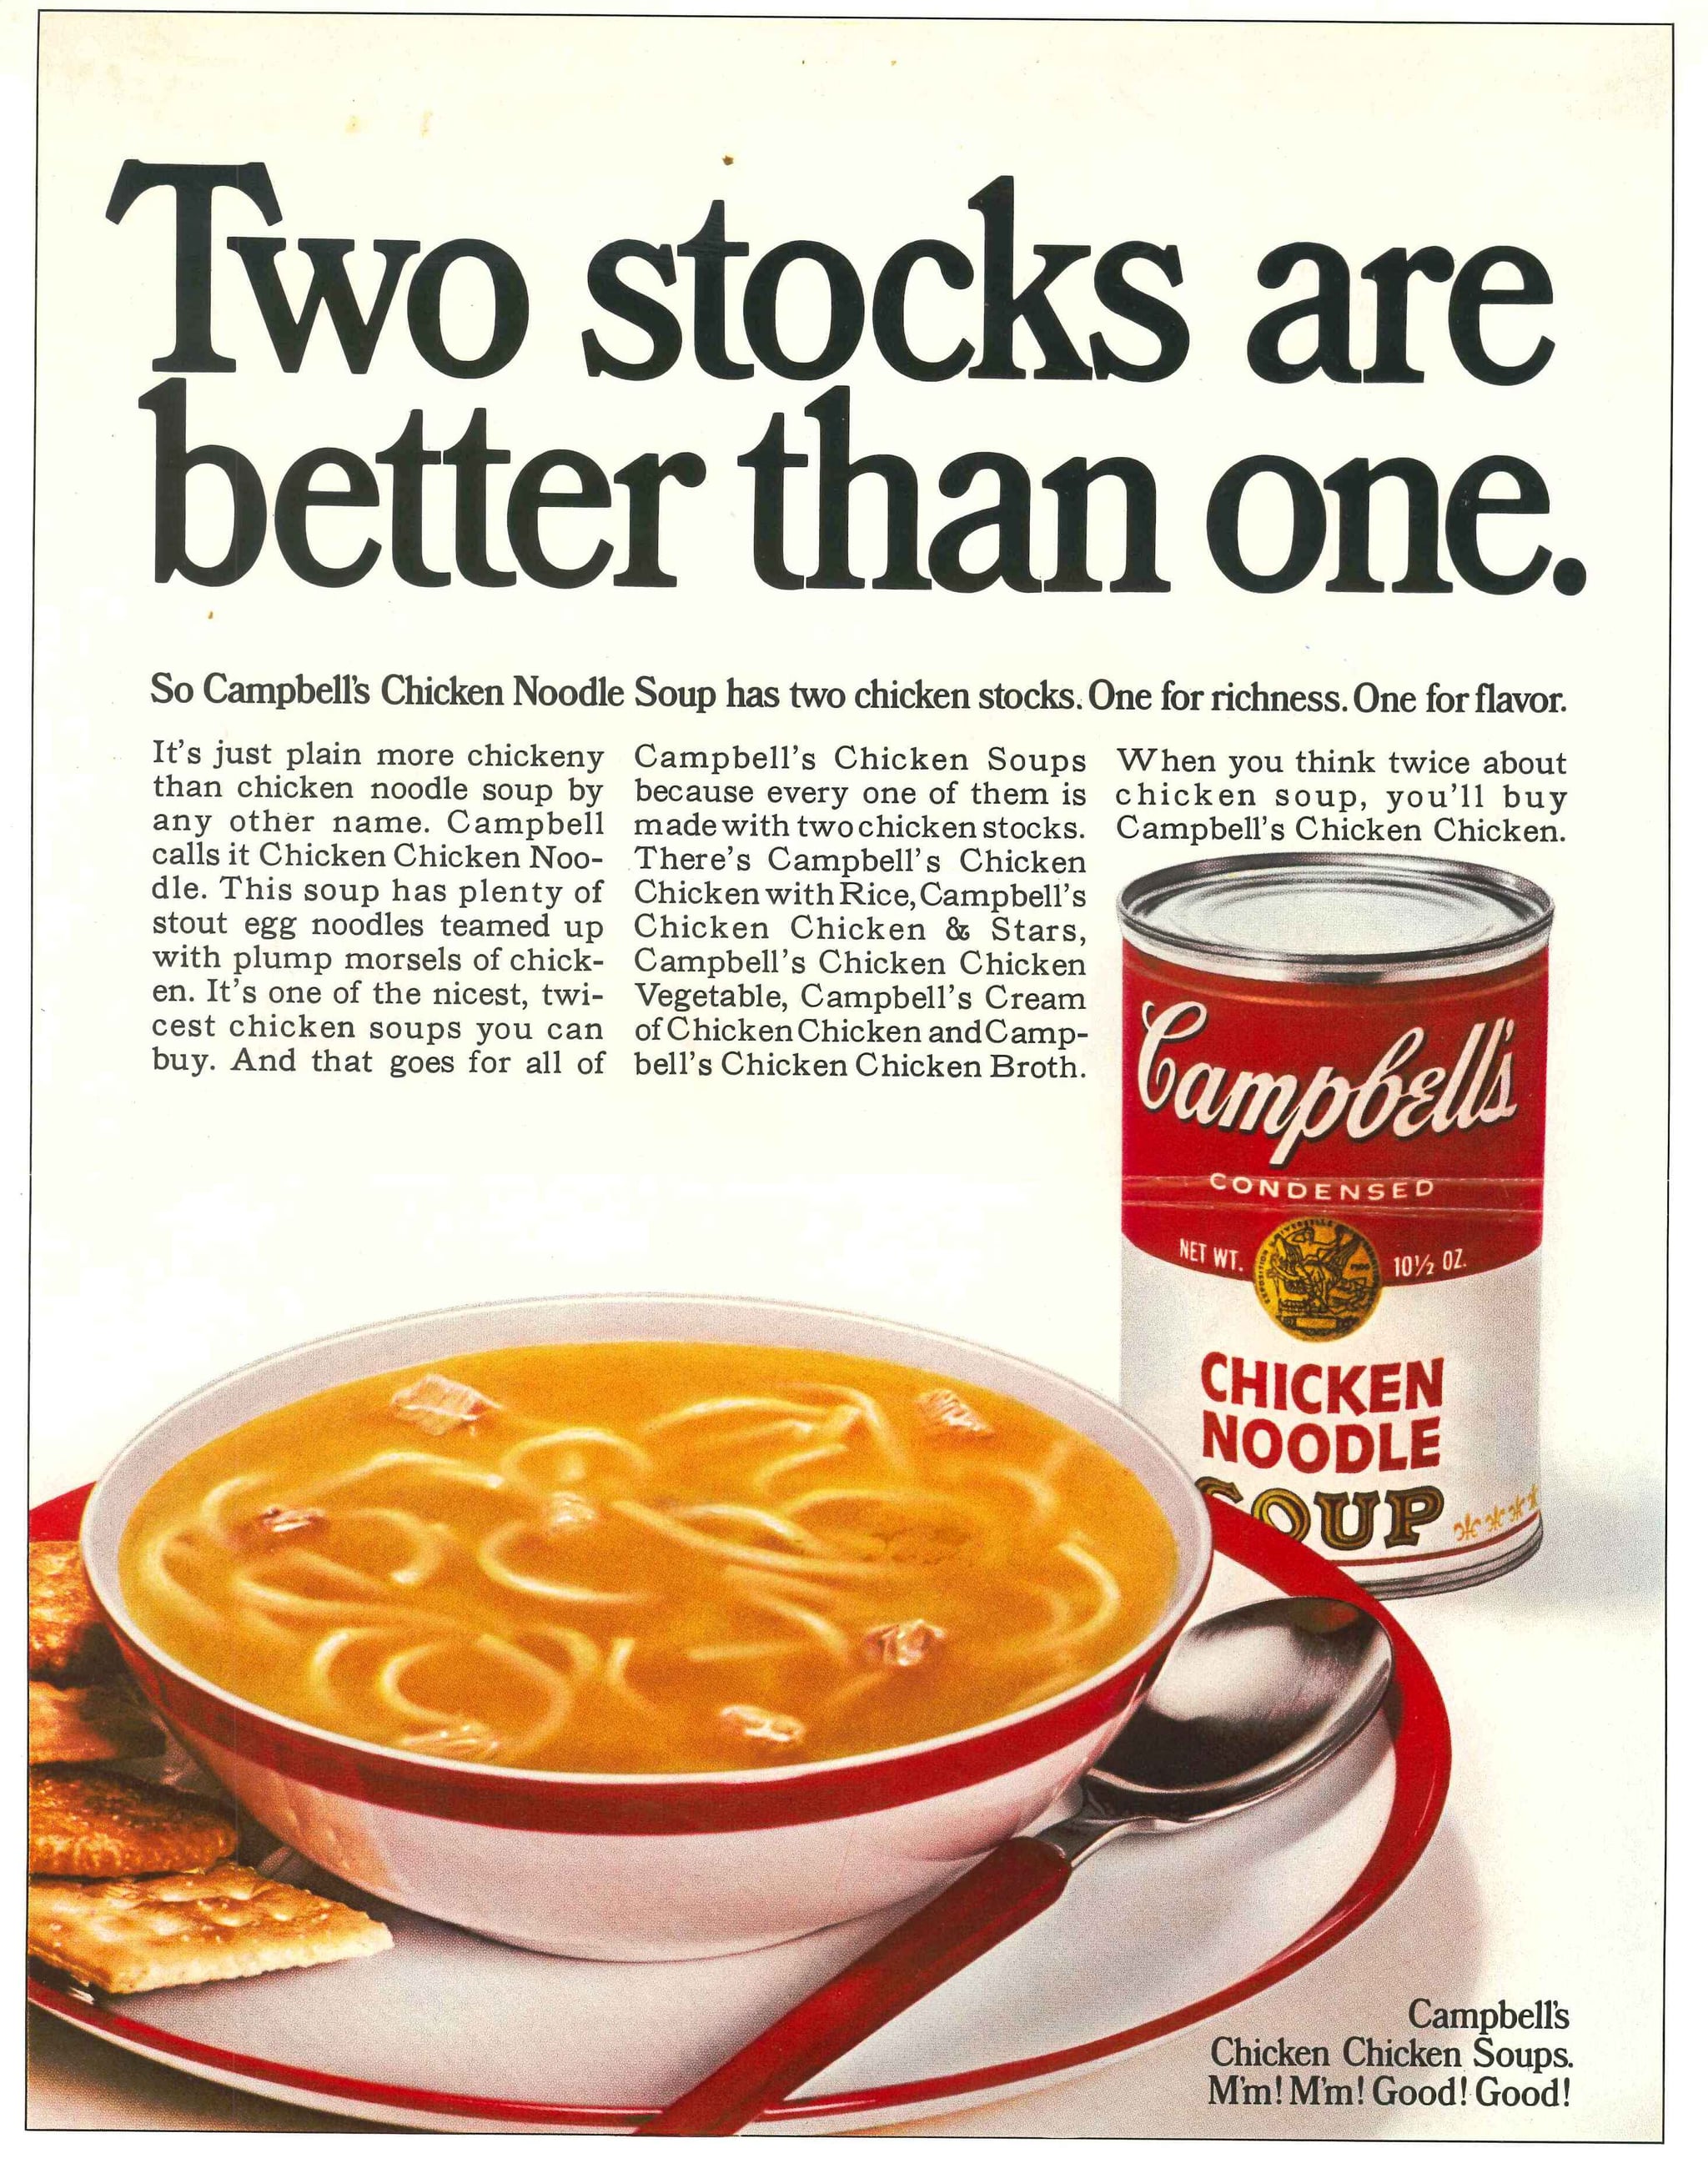 How To Spice Up Campbell's Chicken Noodle Soup / Sensational Chicken ...